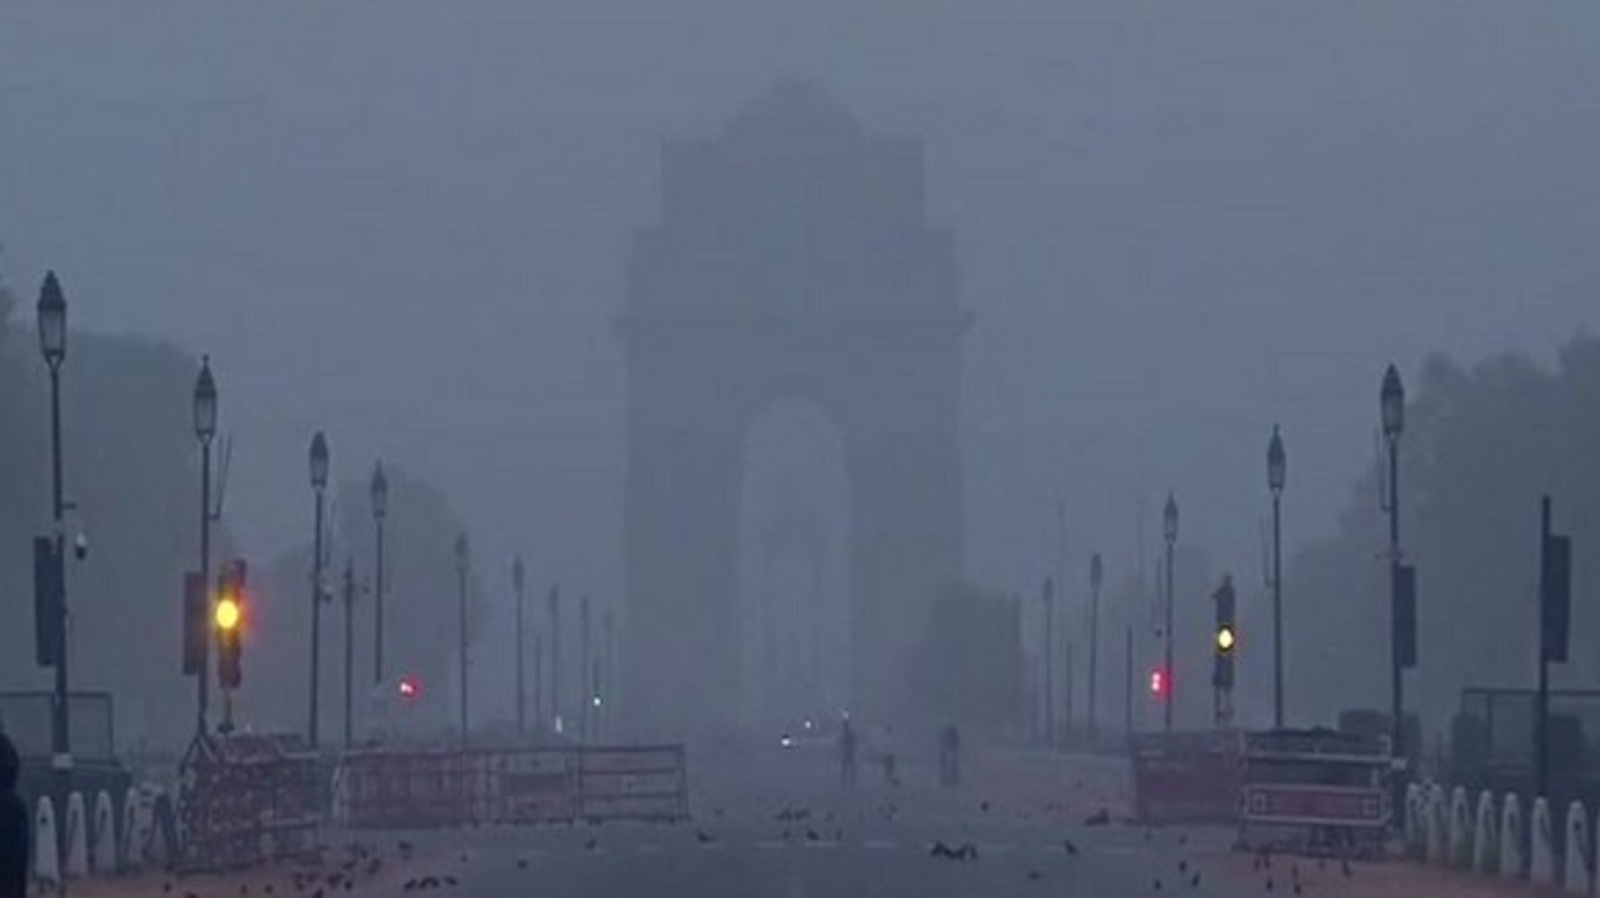 Cold wave in parts of Delhi may ease from Wednesday, rain likely IMD